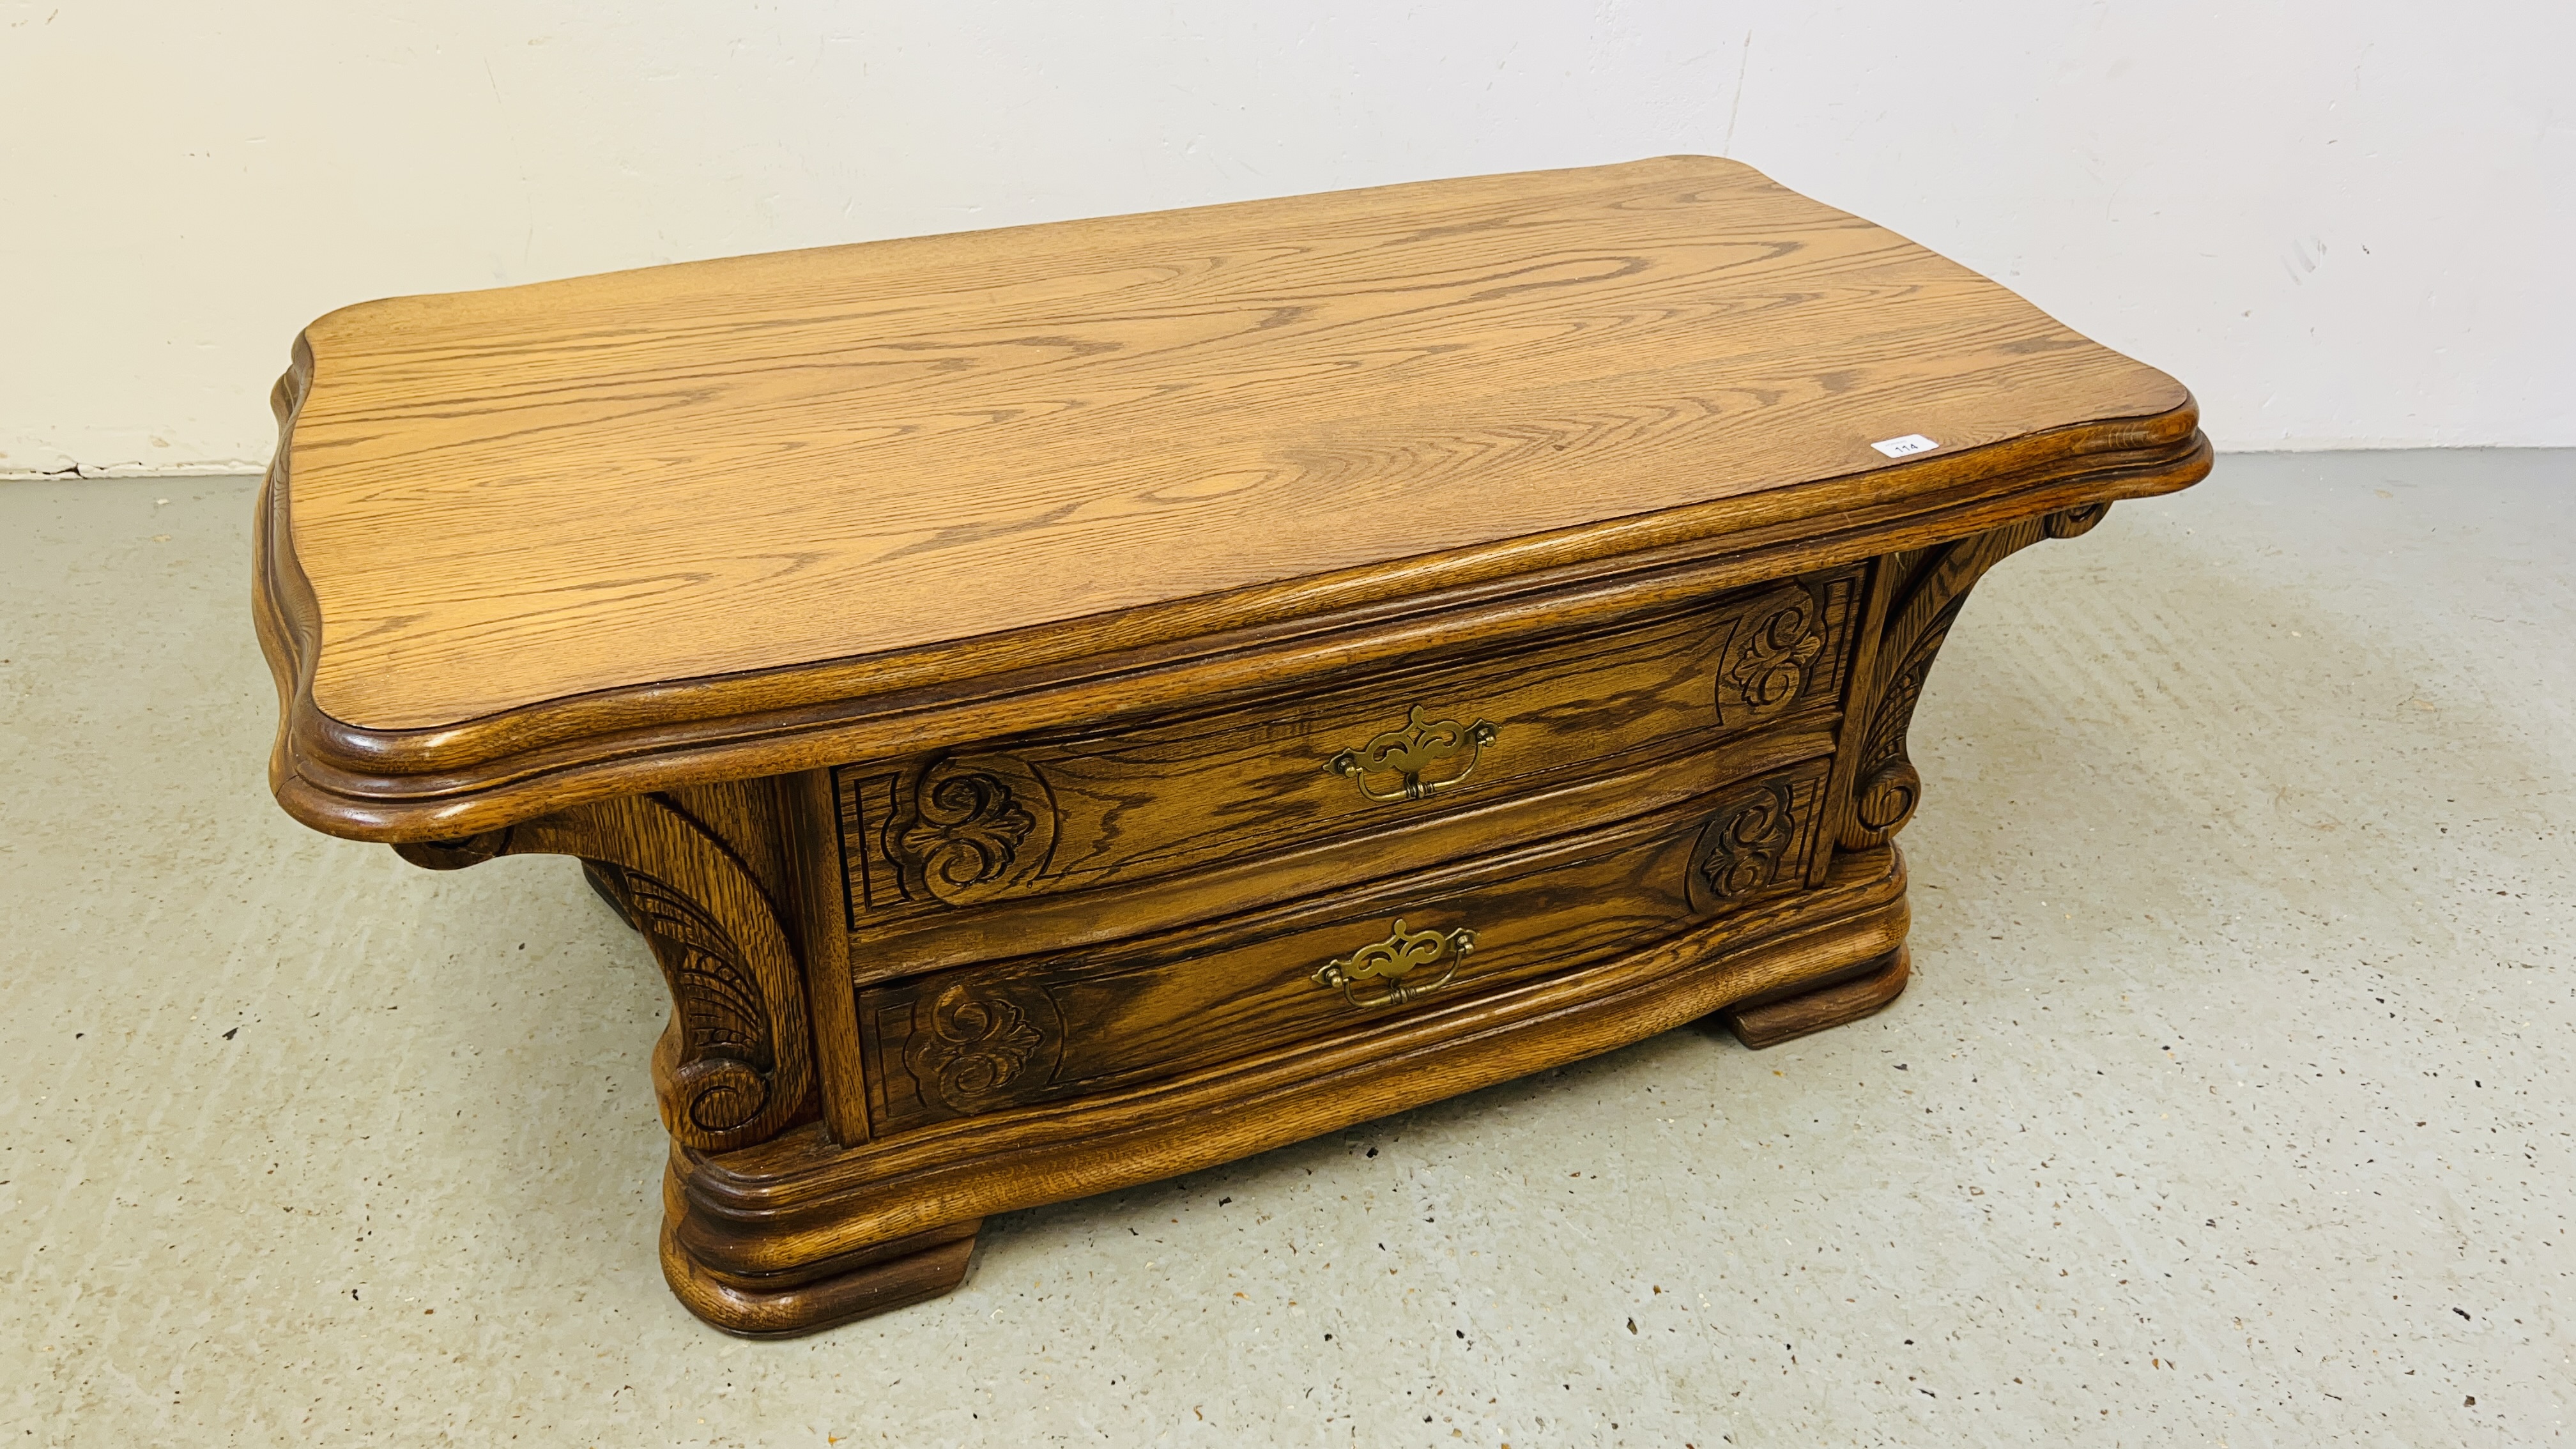 AN OAK TWO DRAWER COFFEE TABLE WITH CARVED DETAIL 120CM X 68CM.